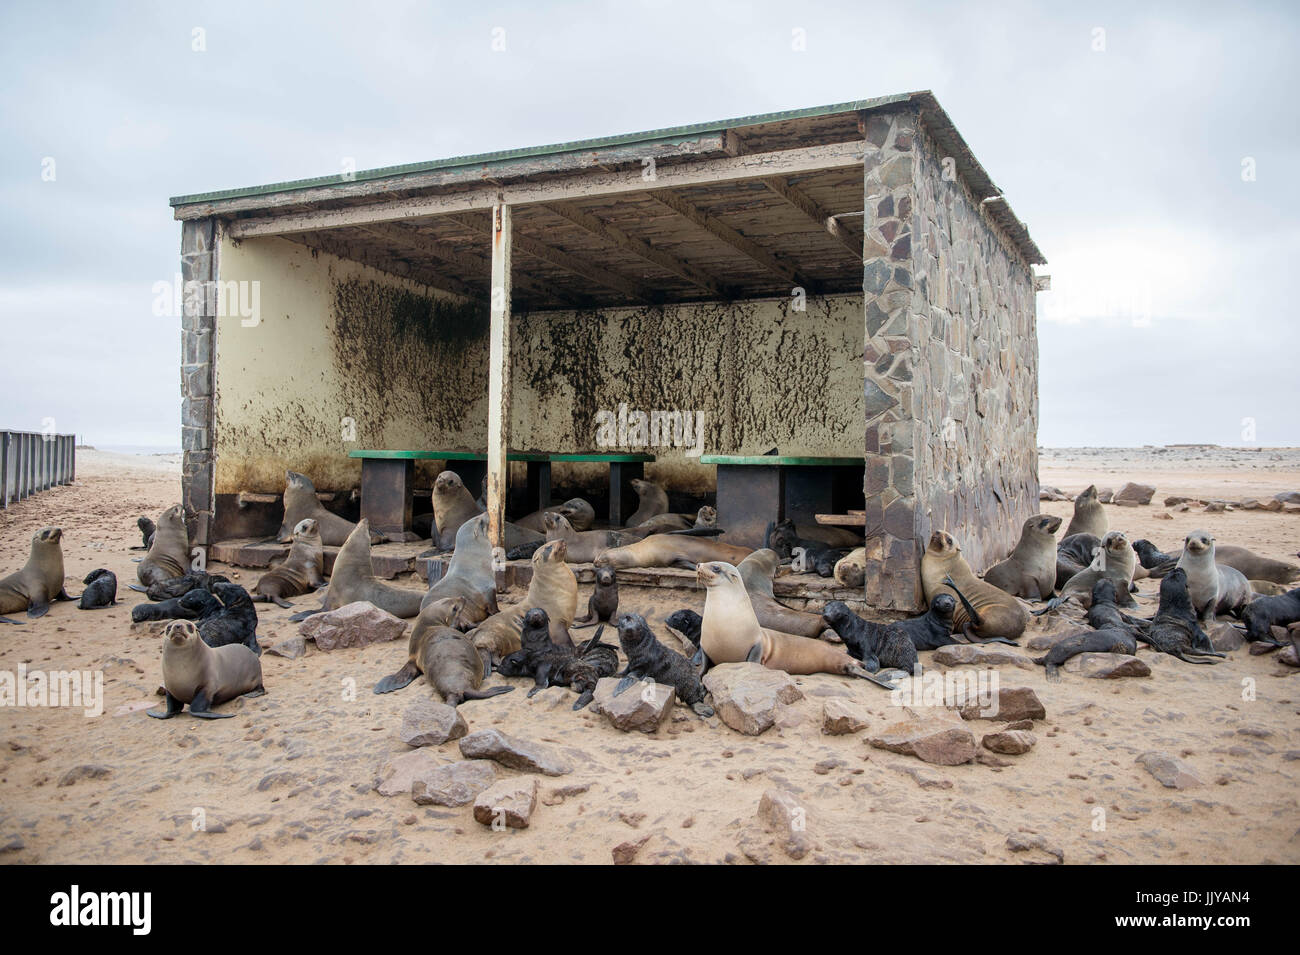 Cape fur seals are gathered and resting inside of an abandoned structure on the beaches of Cape Cross, located in Namibia, Africa. The Cape Cross Seal Stock Photo